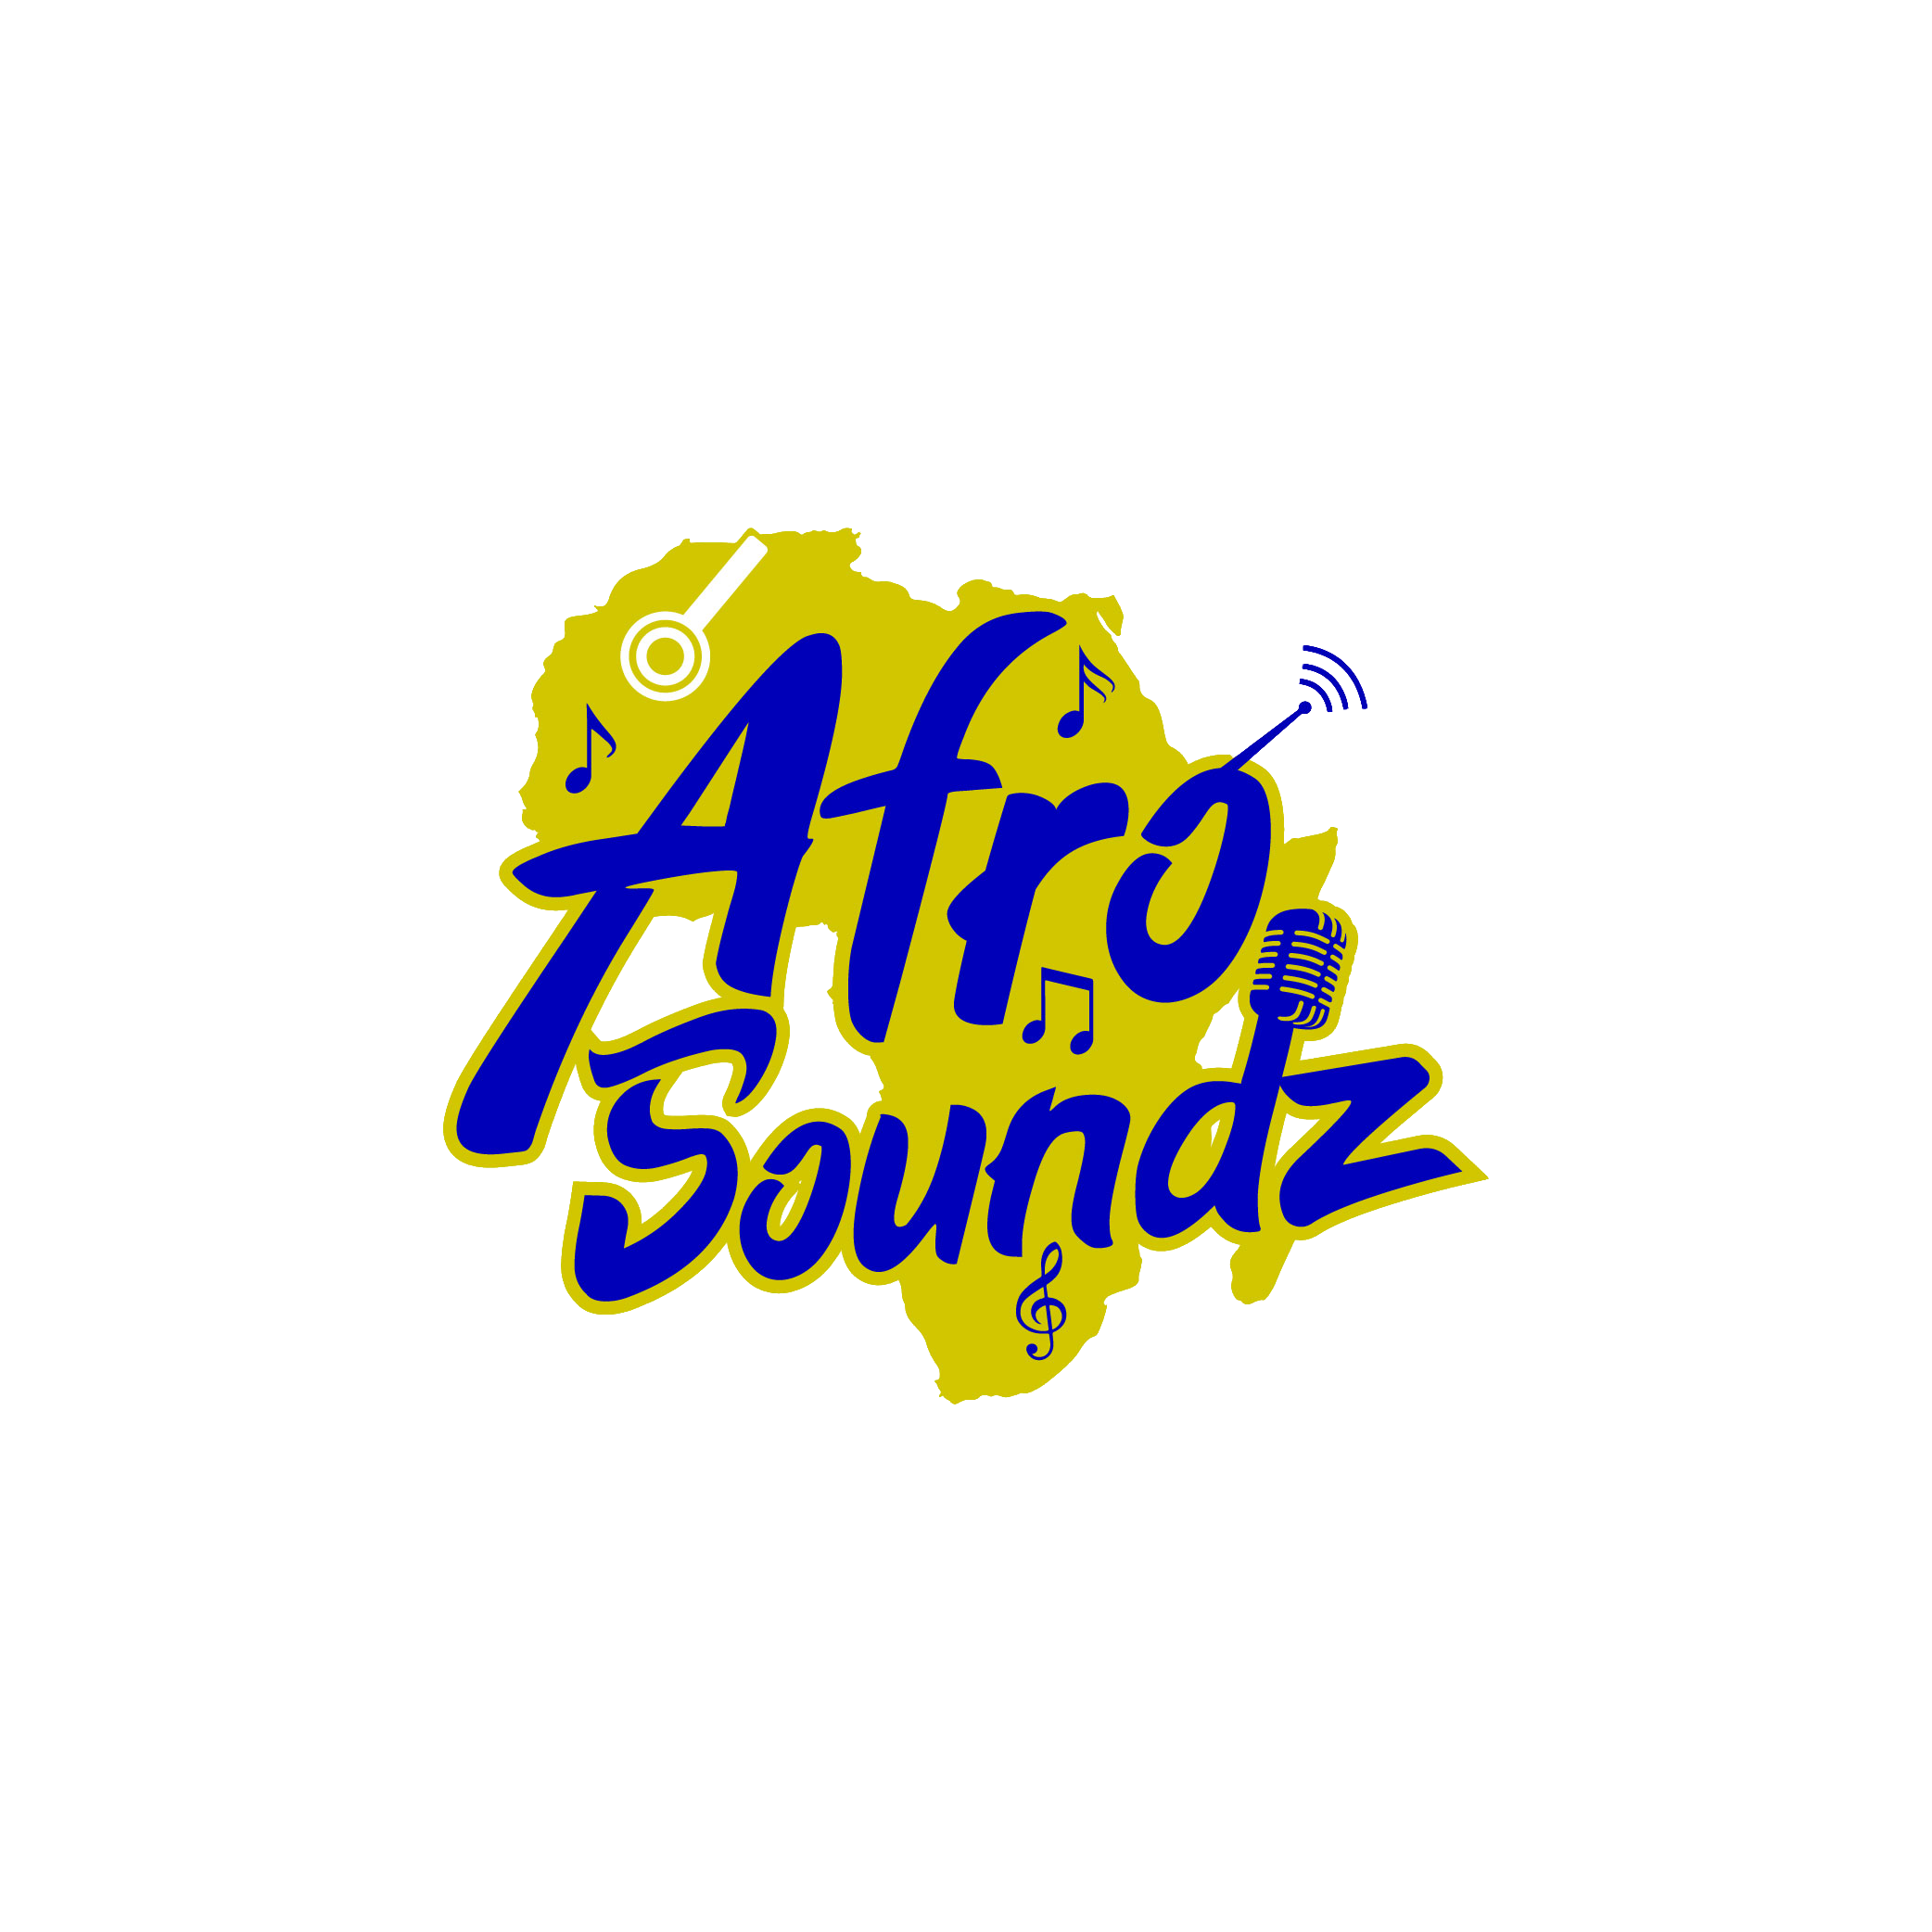 Art for Afro Soundz ID 5 by Afrosoundz